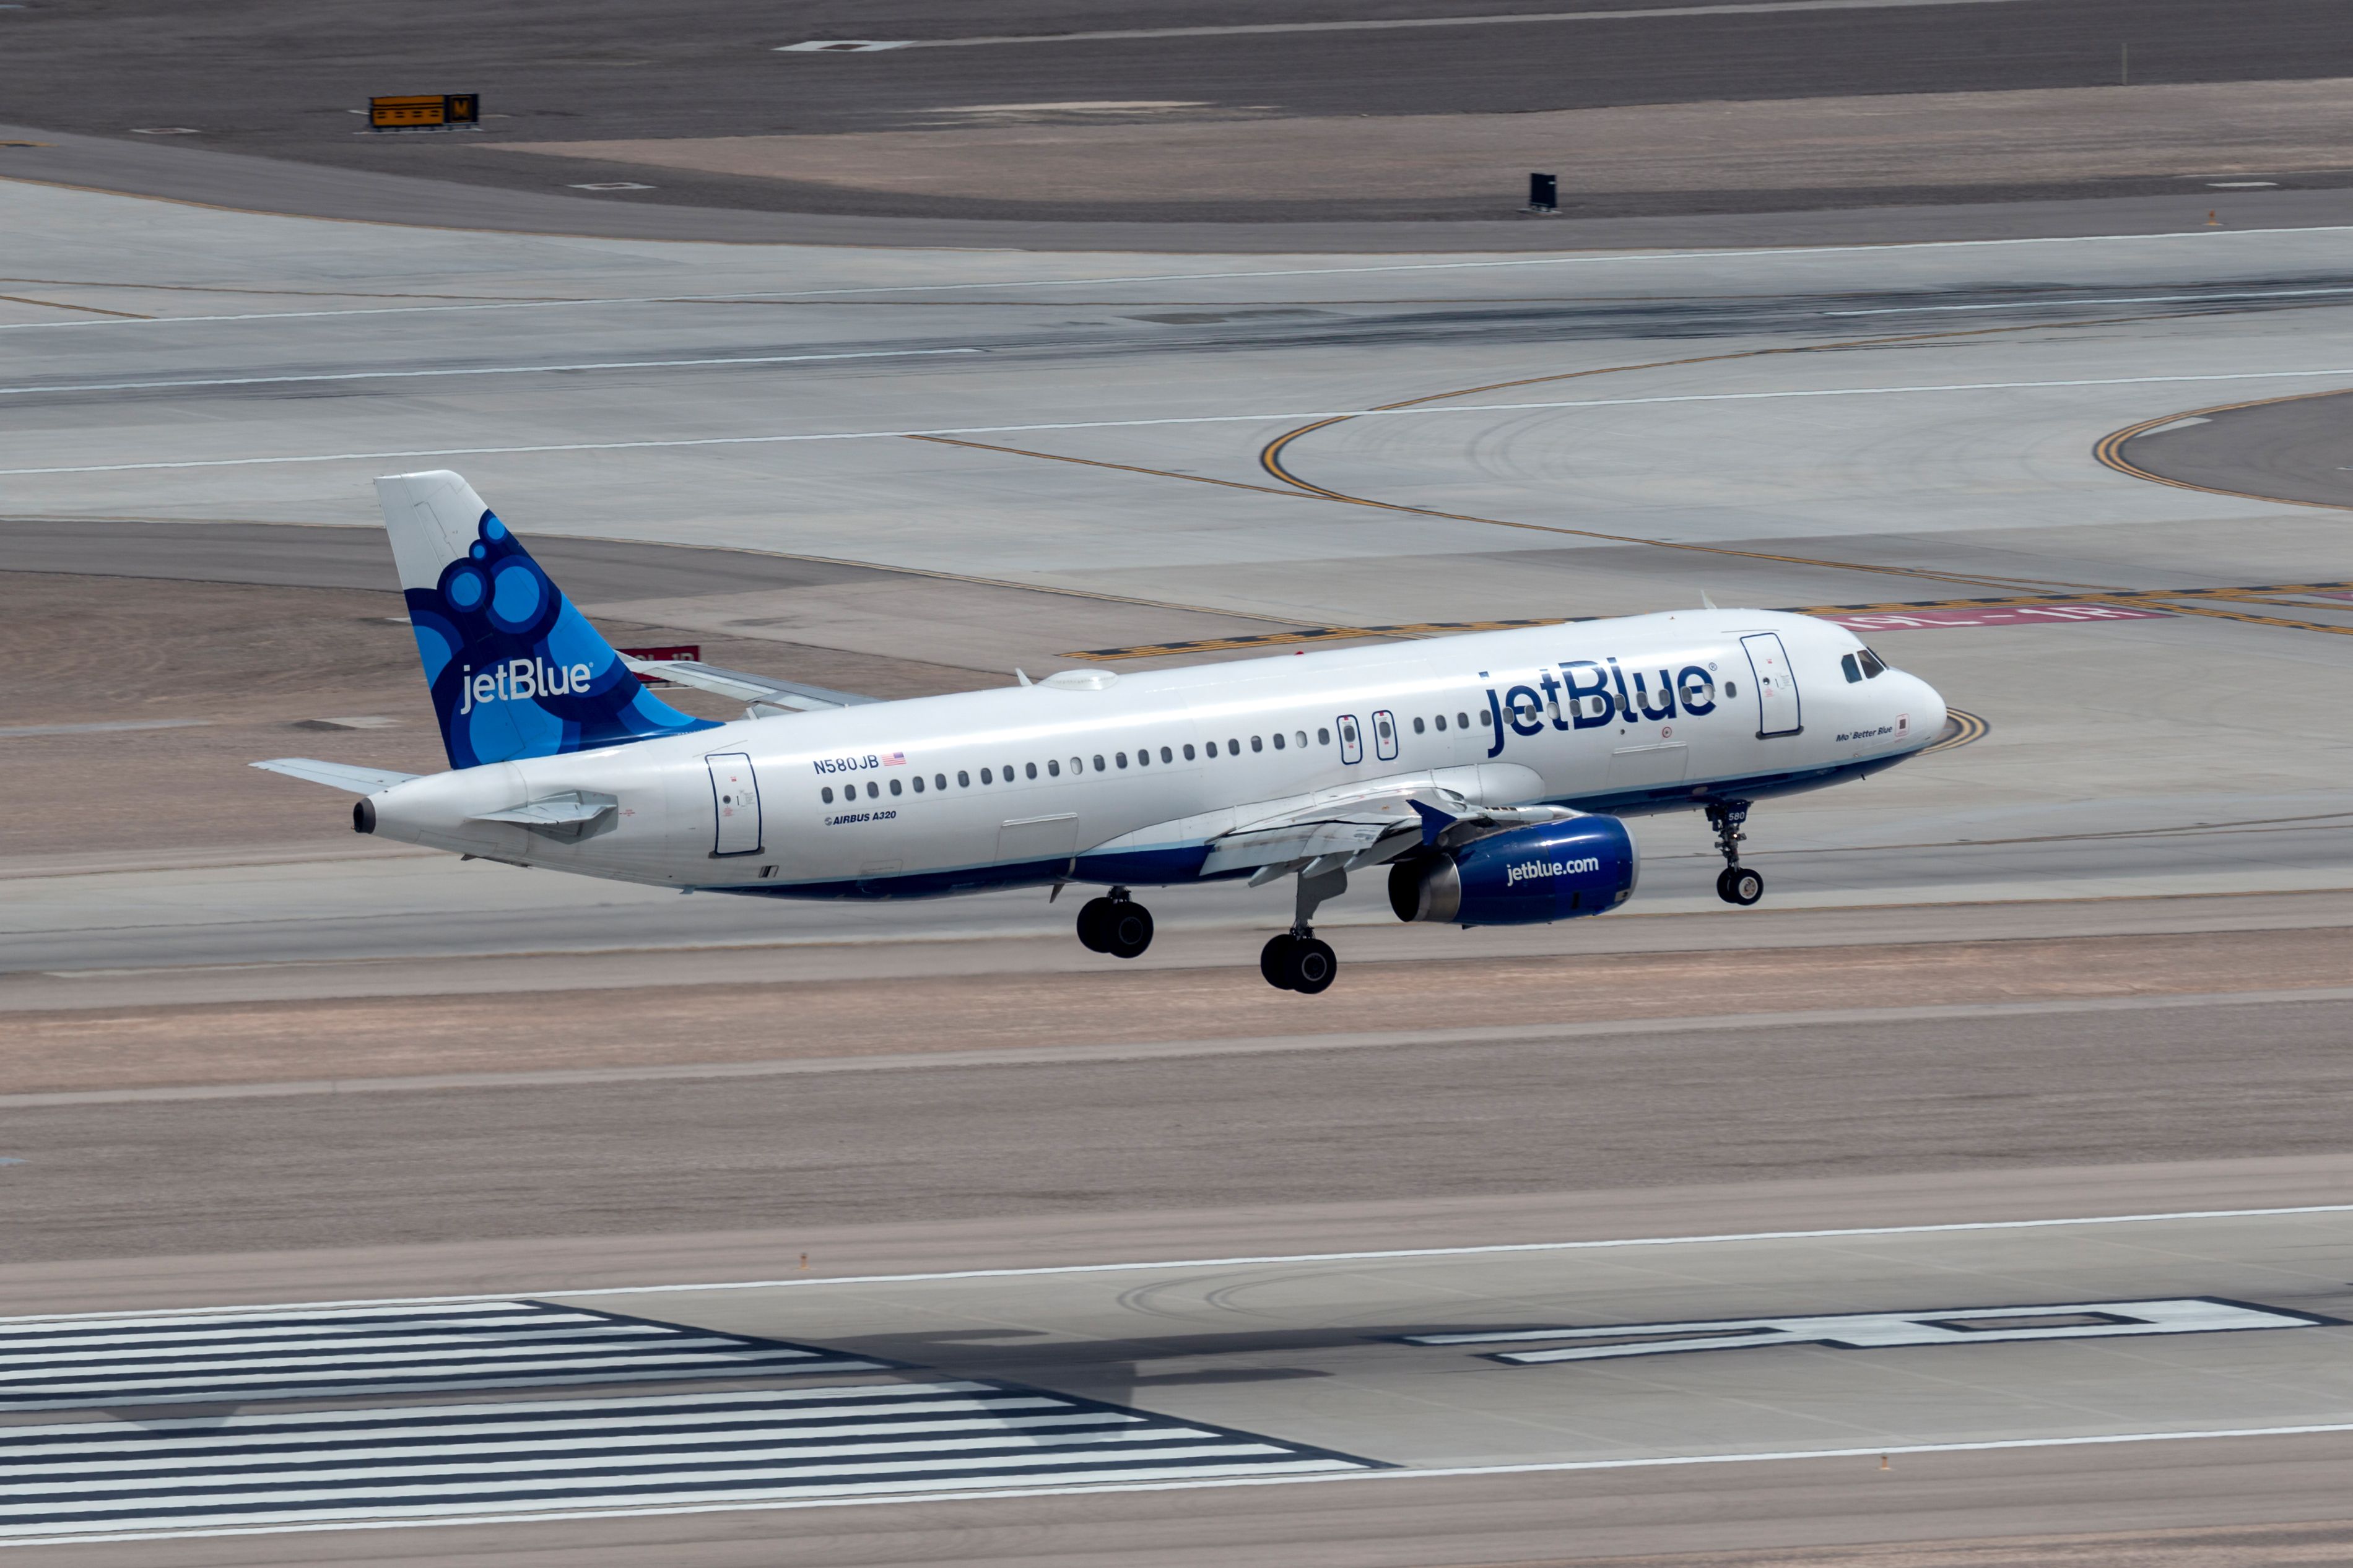 A JetBlue Airbus A320 taking off